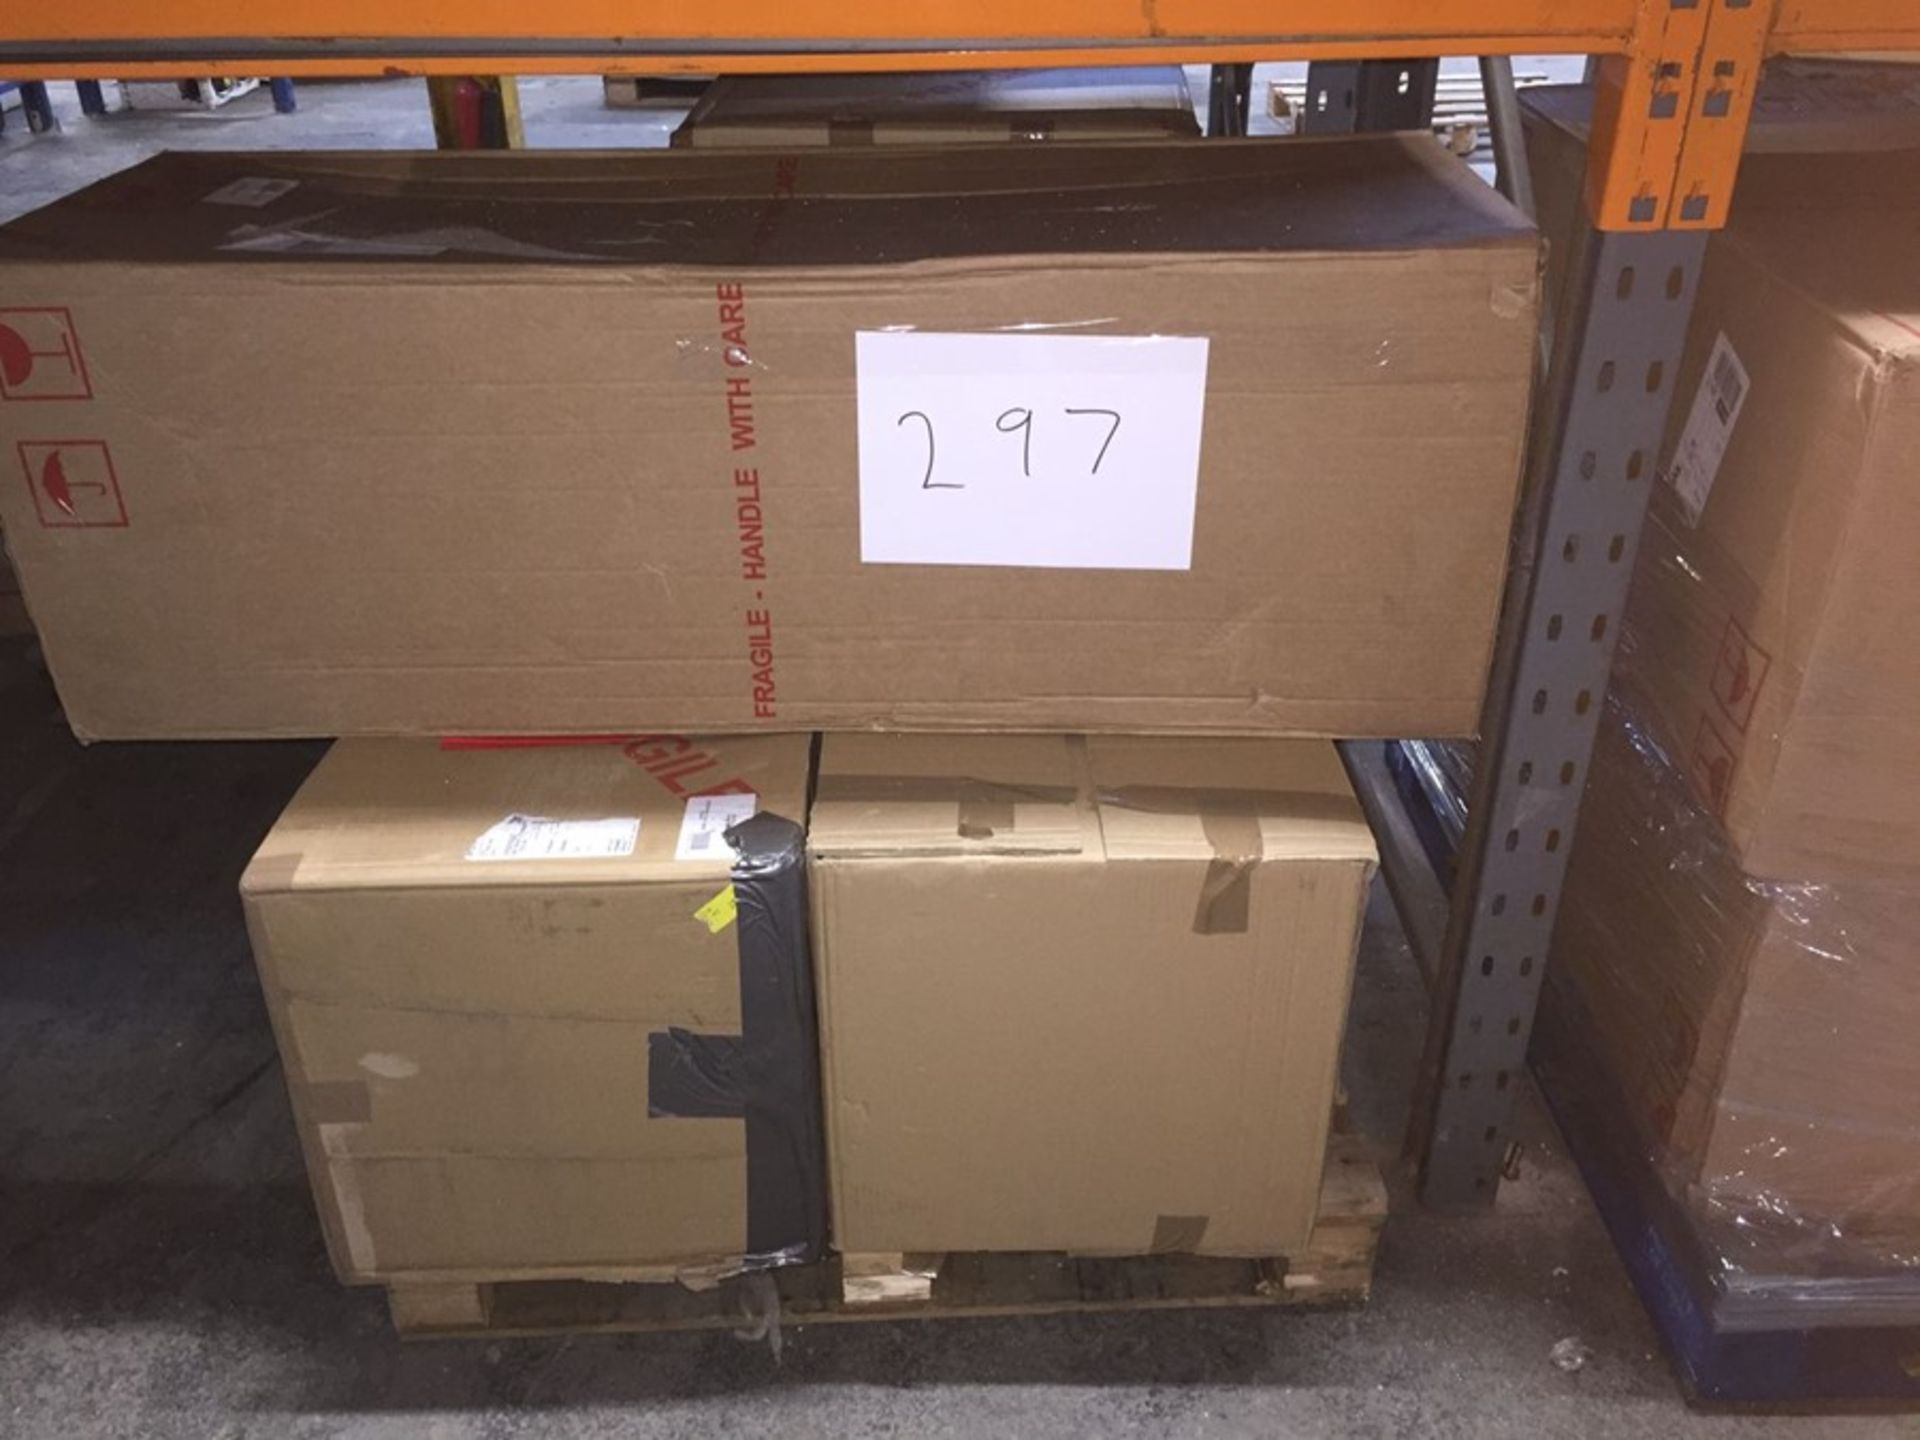 1 X BULK PALLET TO CONTAIN 5 ASSORTED FILING CABINETS, SIZES AND COLOURS VARY - L7